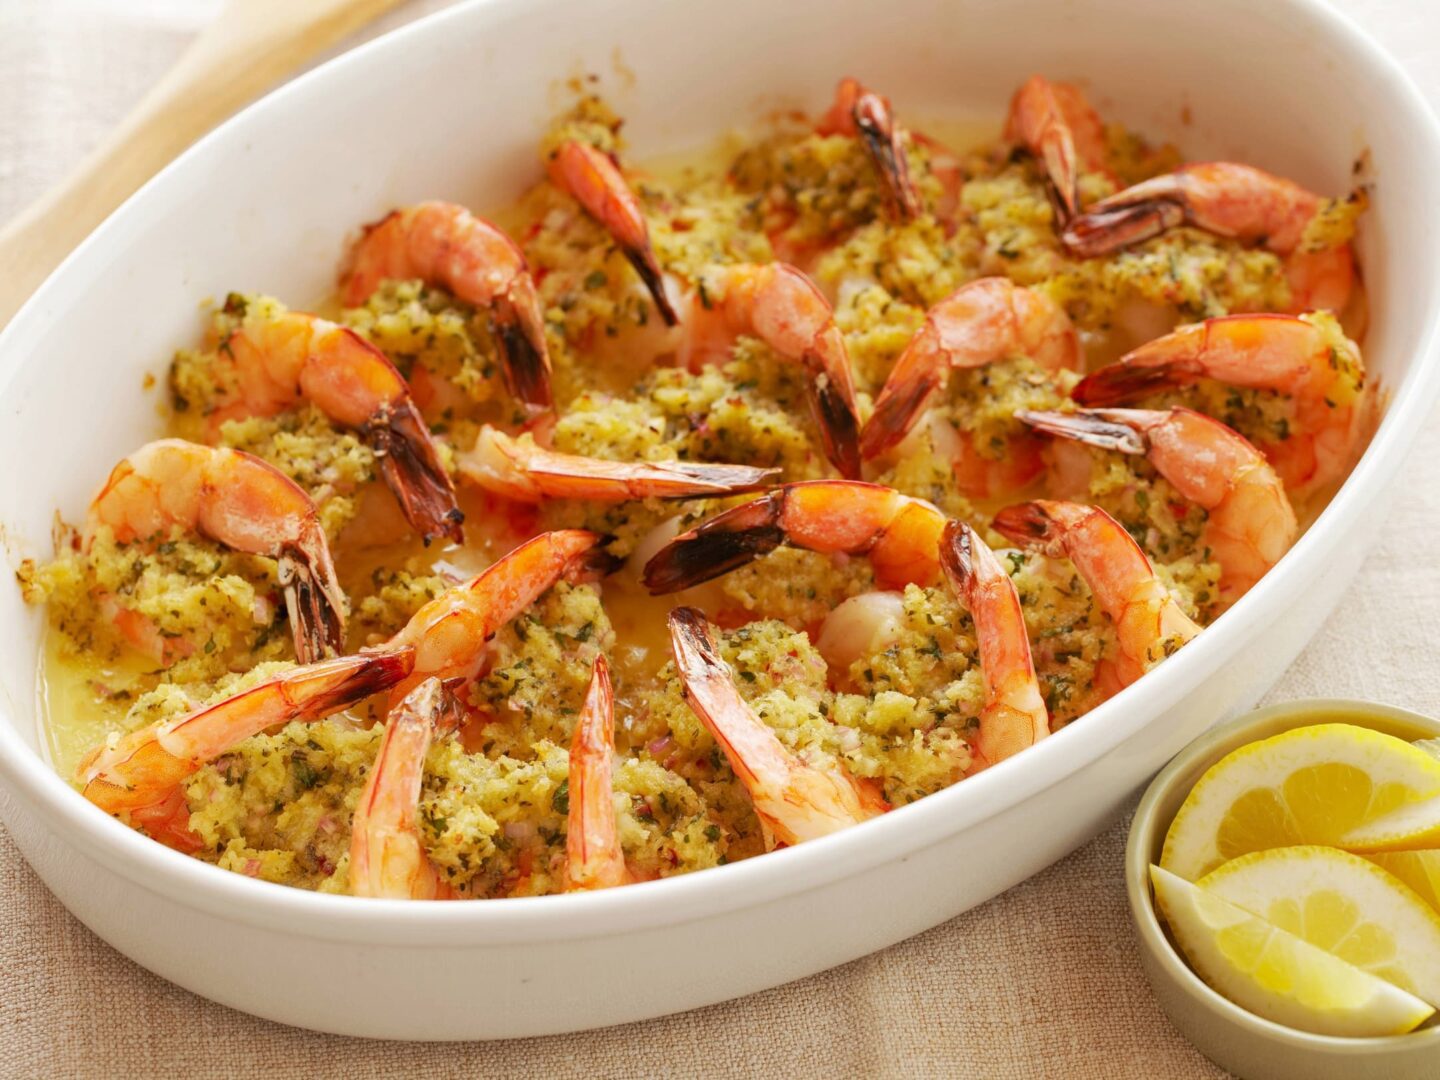 Baked Stuffed Shrimp With Crab recipe